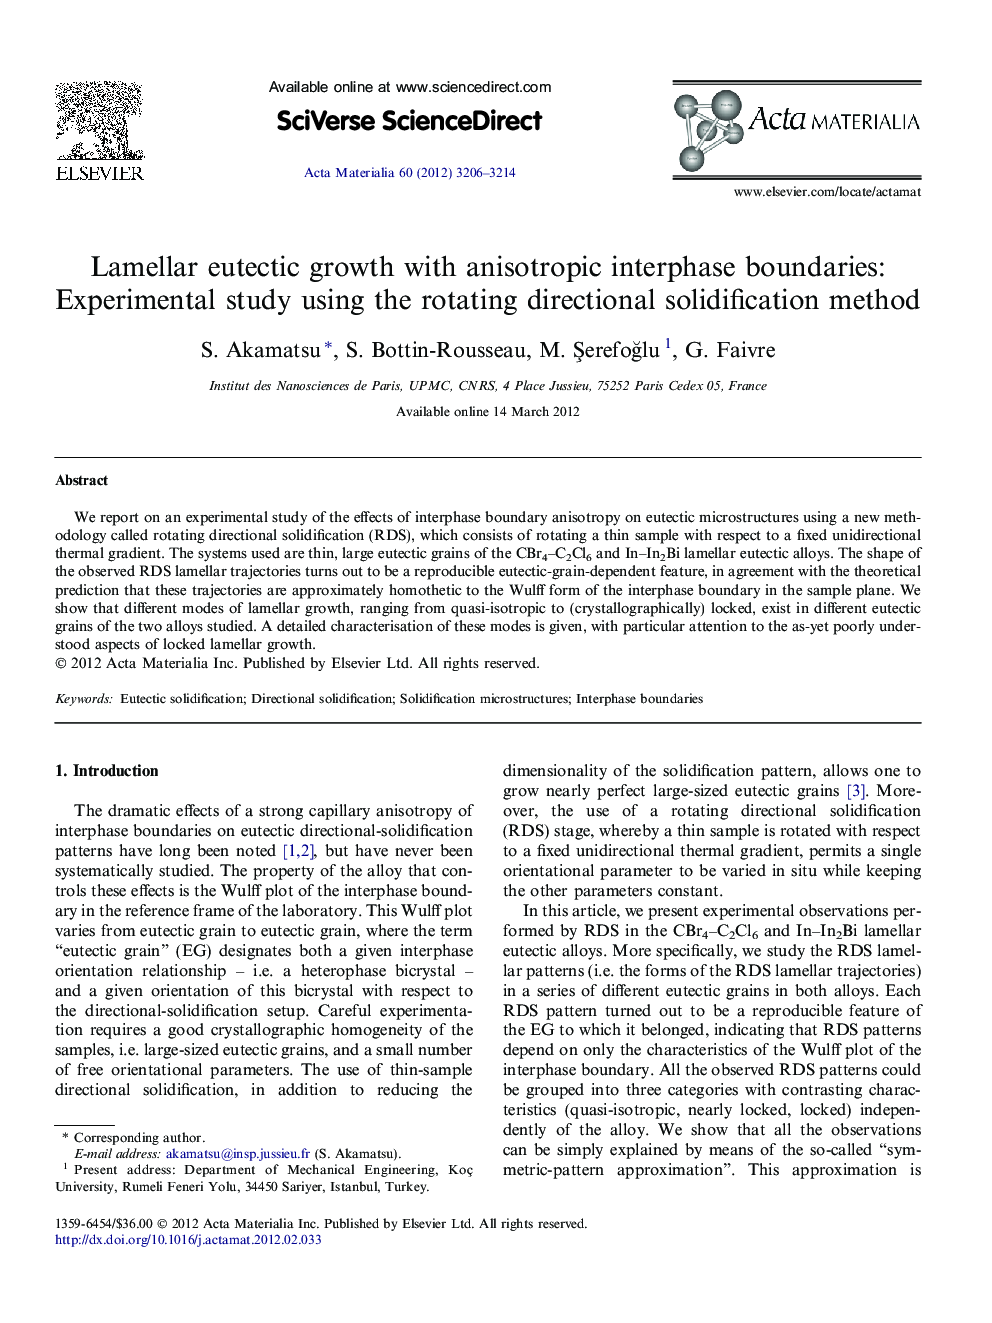 Lamellar eutectic growth with anisotropic interphase boundaries: Experimental study using the rotating directional solidification method